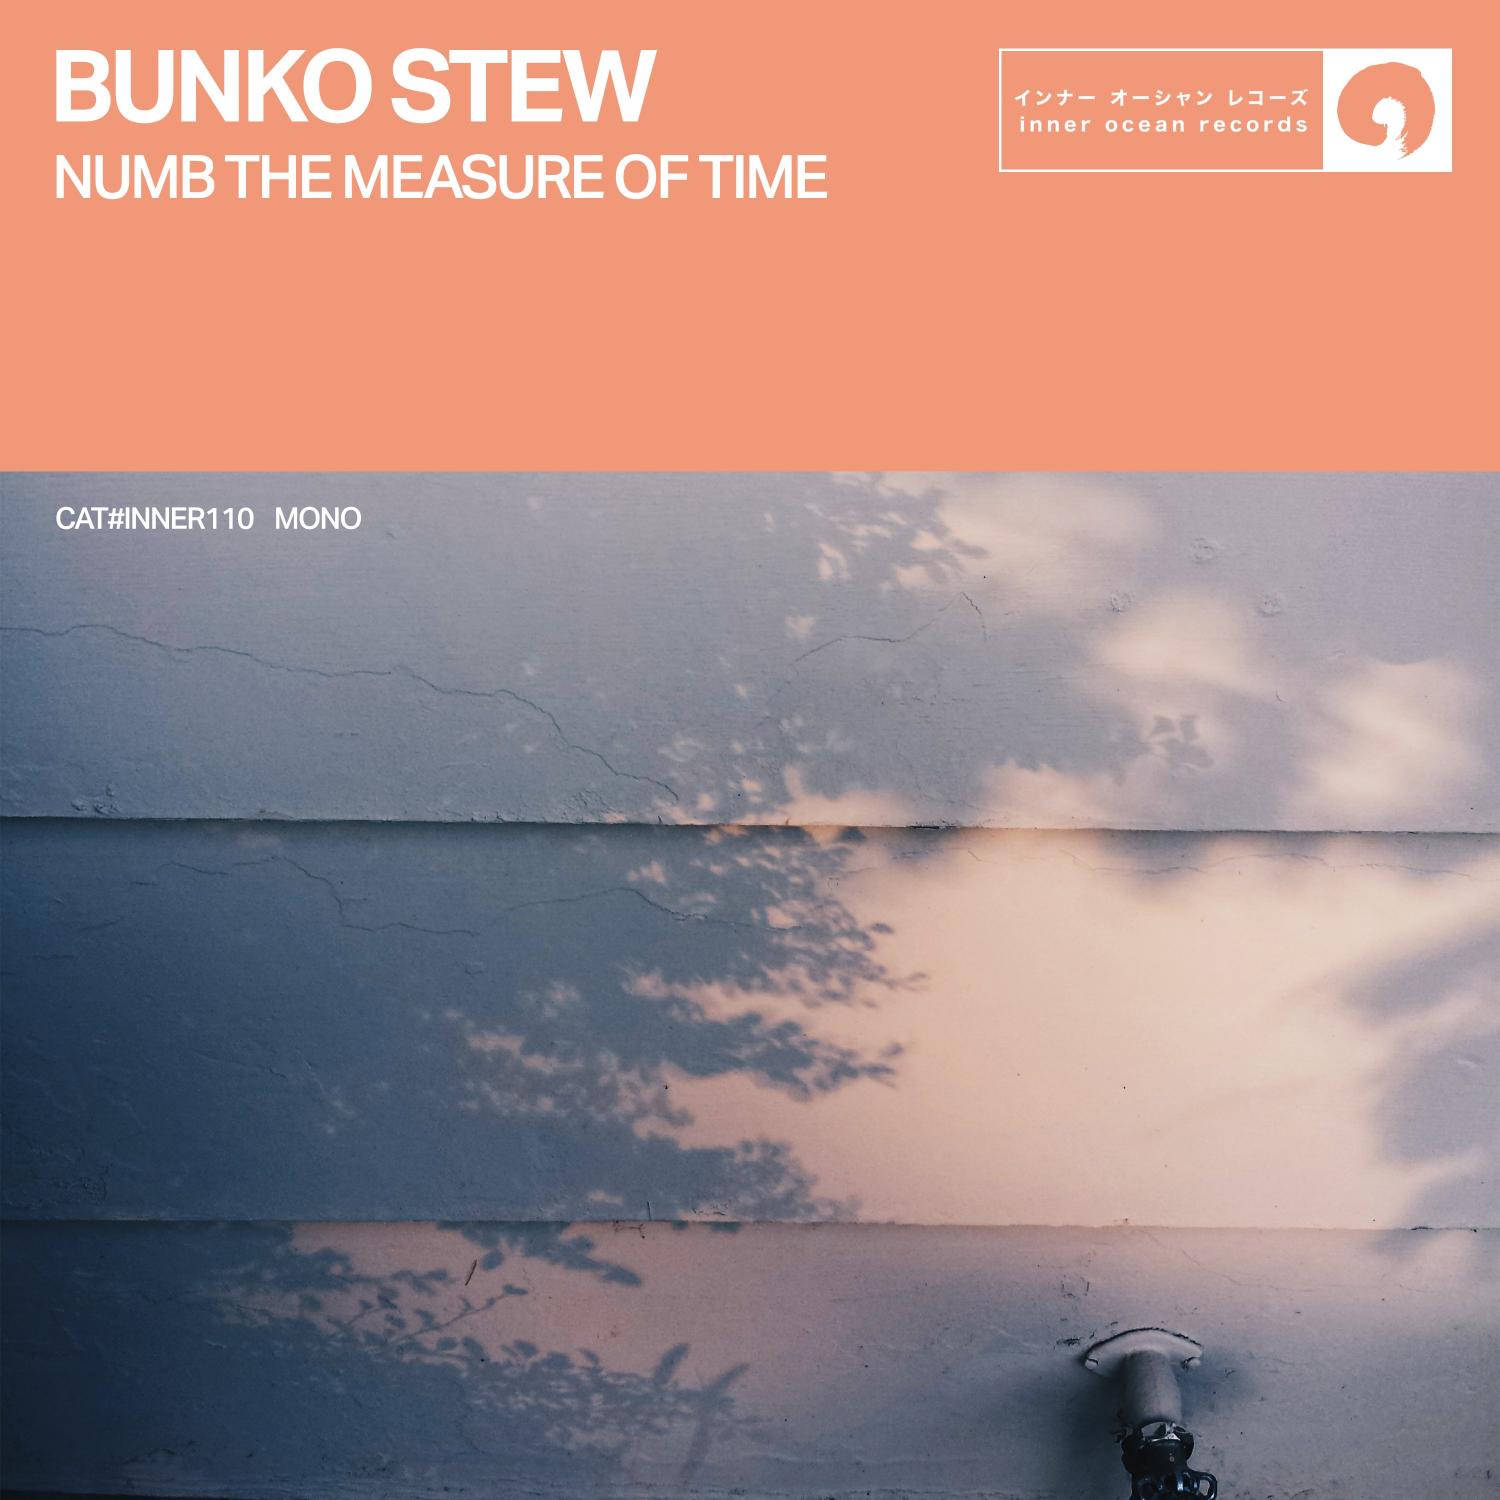 Bunko Stew - Numb The Measure Of Time - Inner Ocean Records